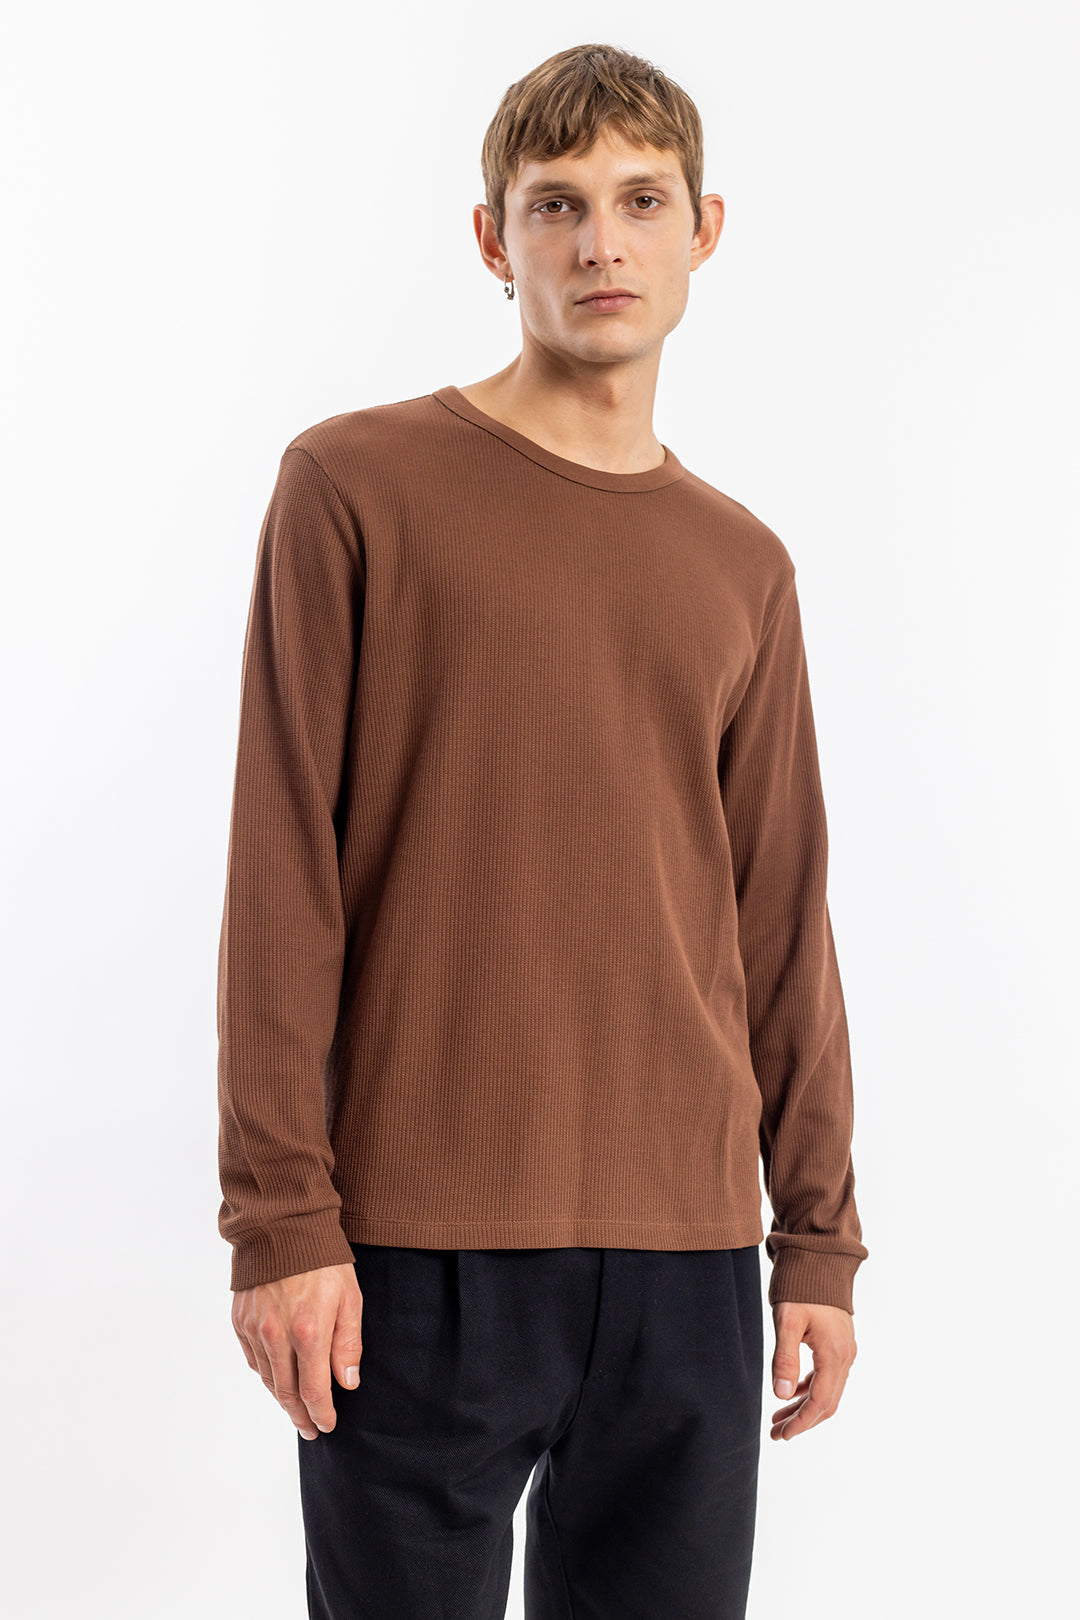 Brown, long-sleeved waffle shirt made of organic cotton from Rotholz